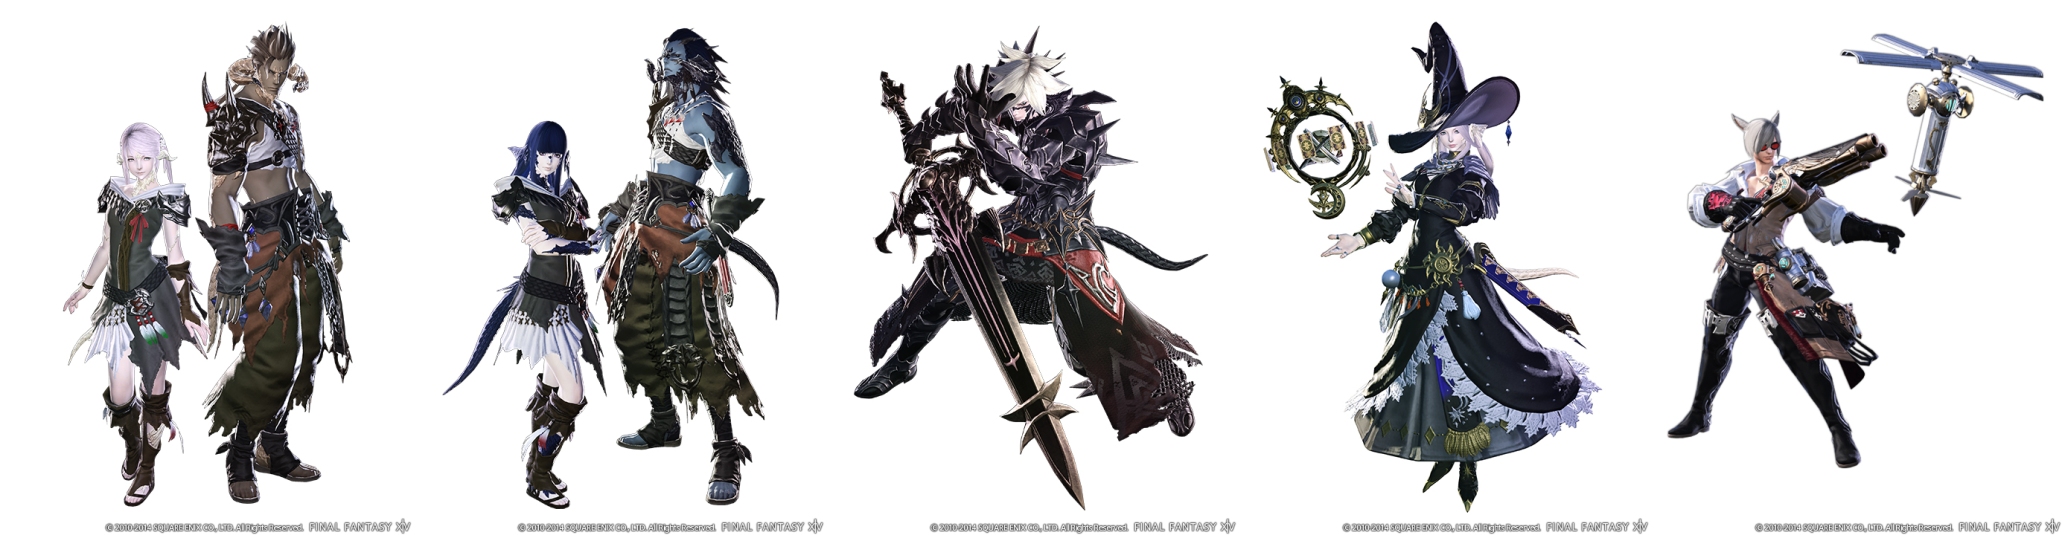 New Race for FF14.